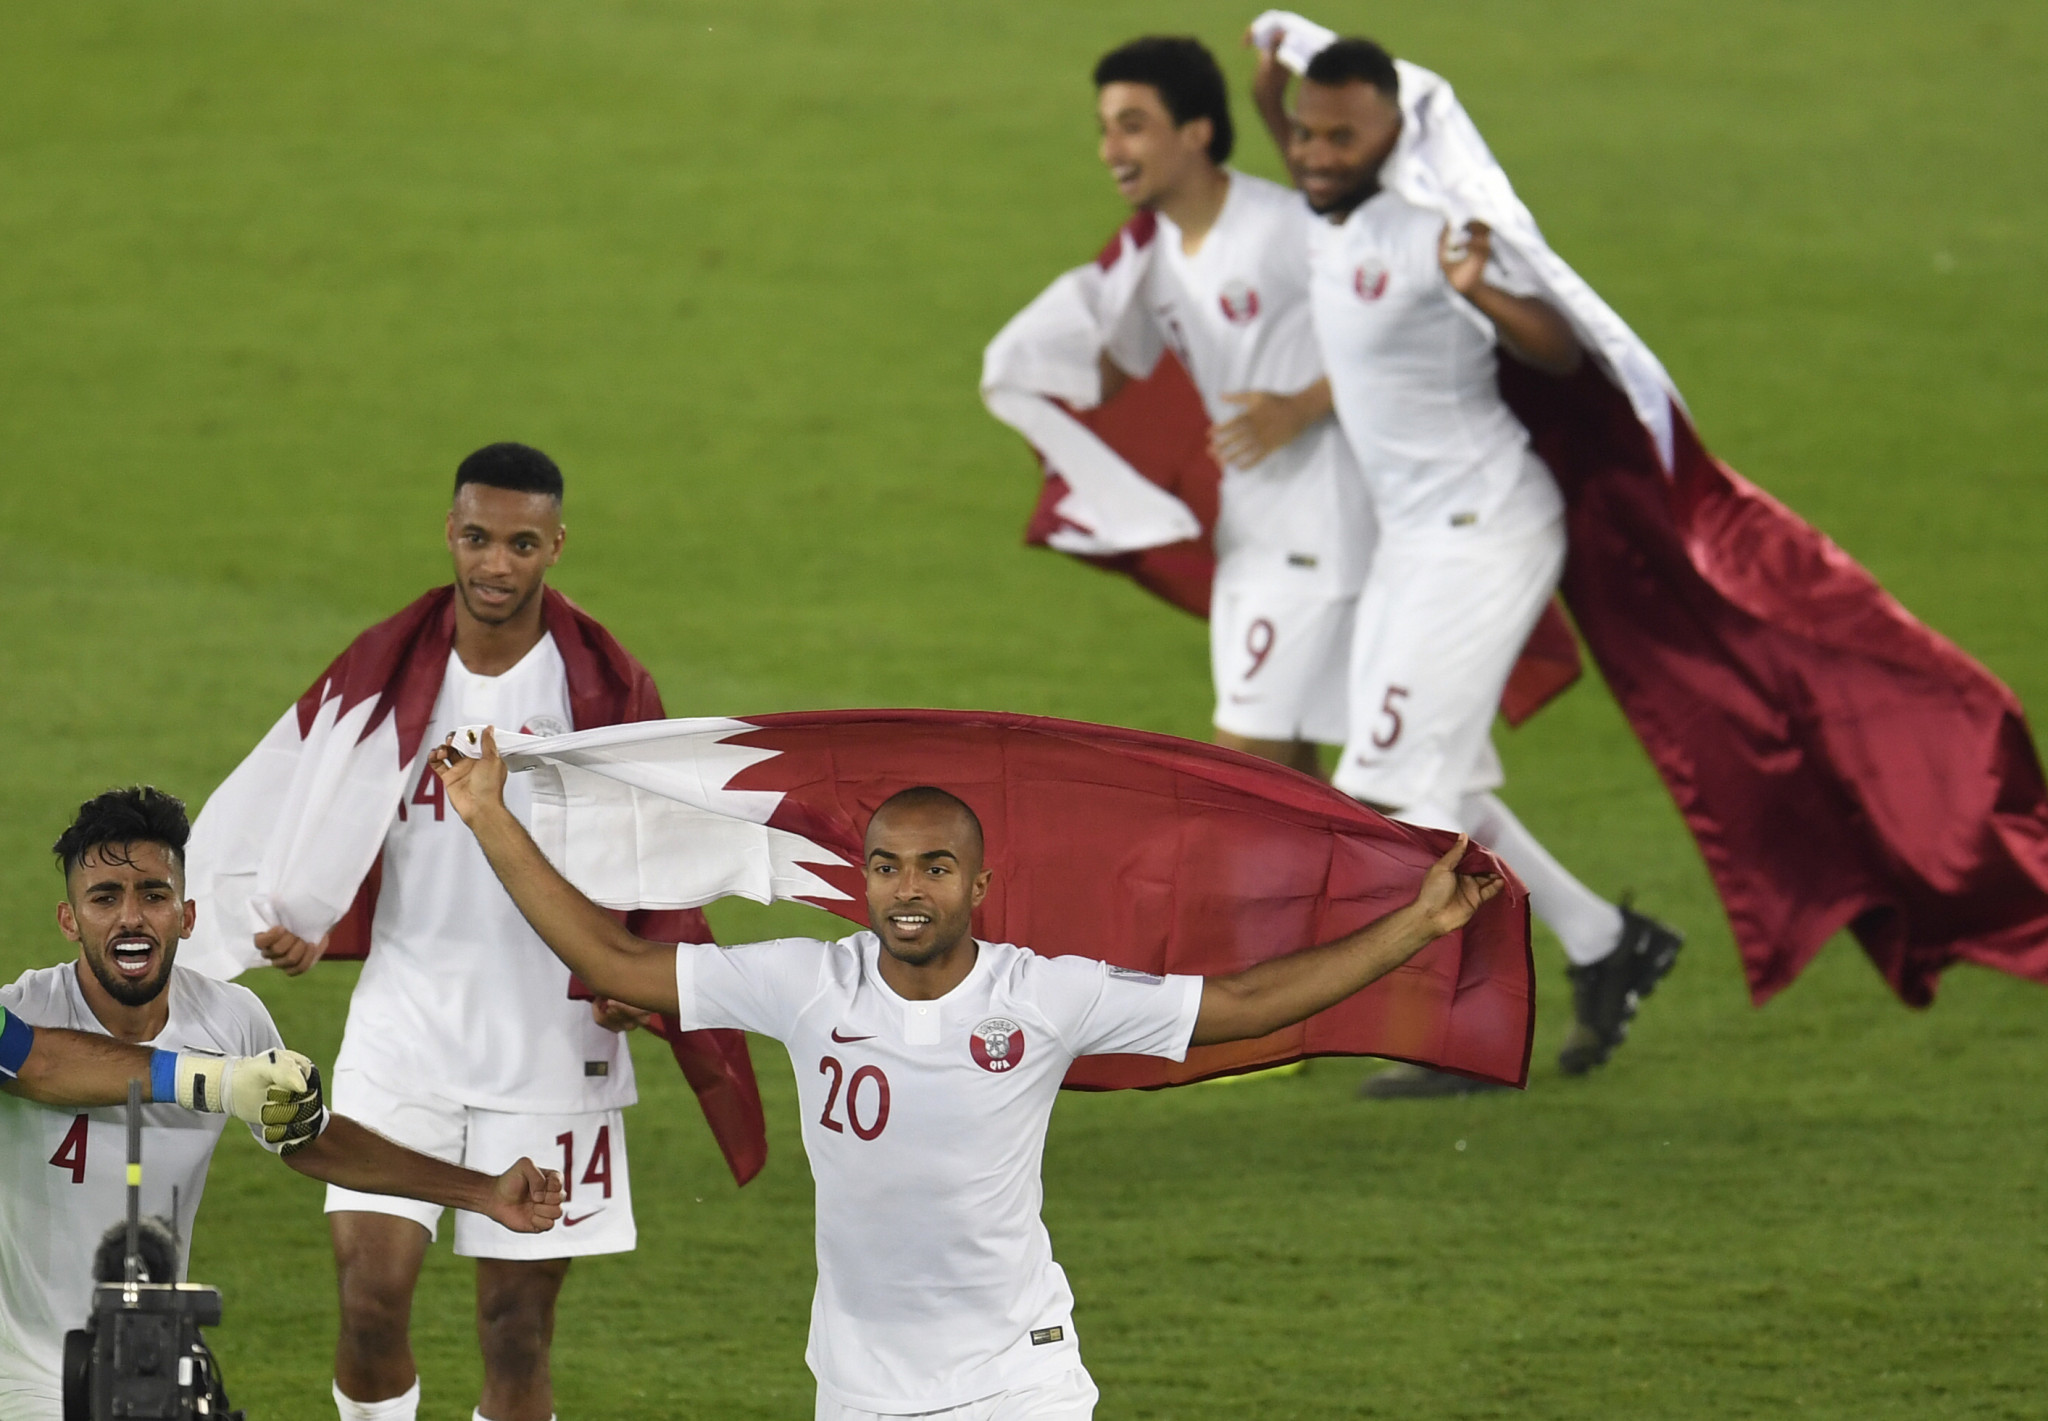 A 3-1 win over Japan saw Qatar seal their first Asian Cup title ©Getty Images